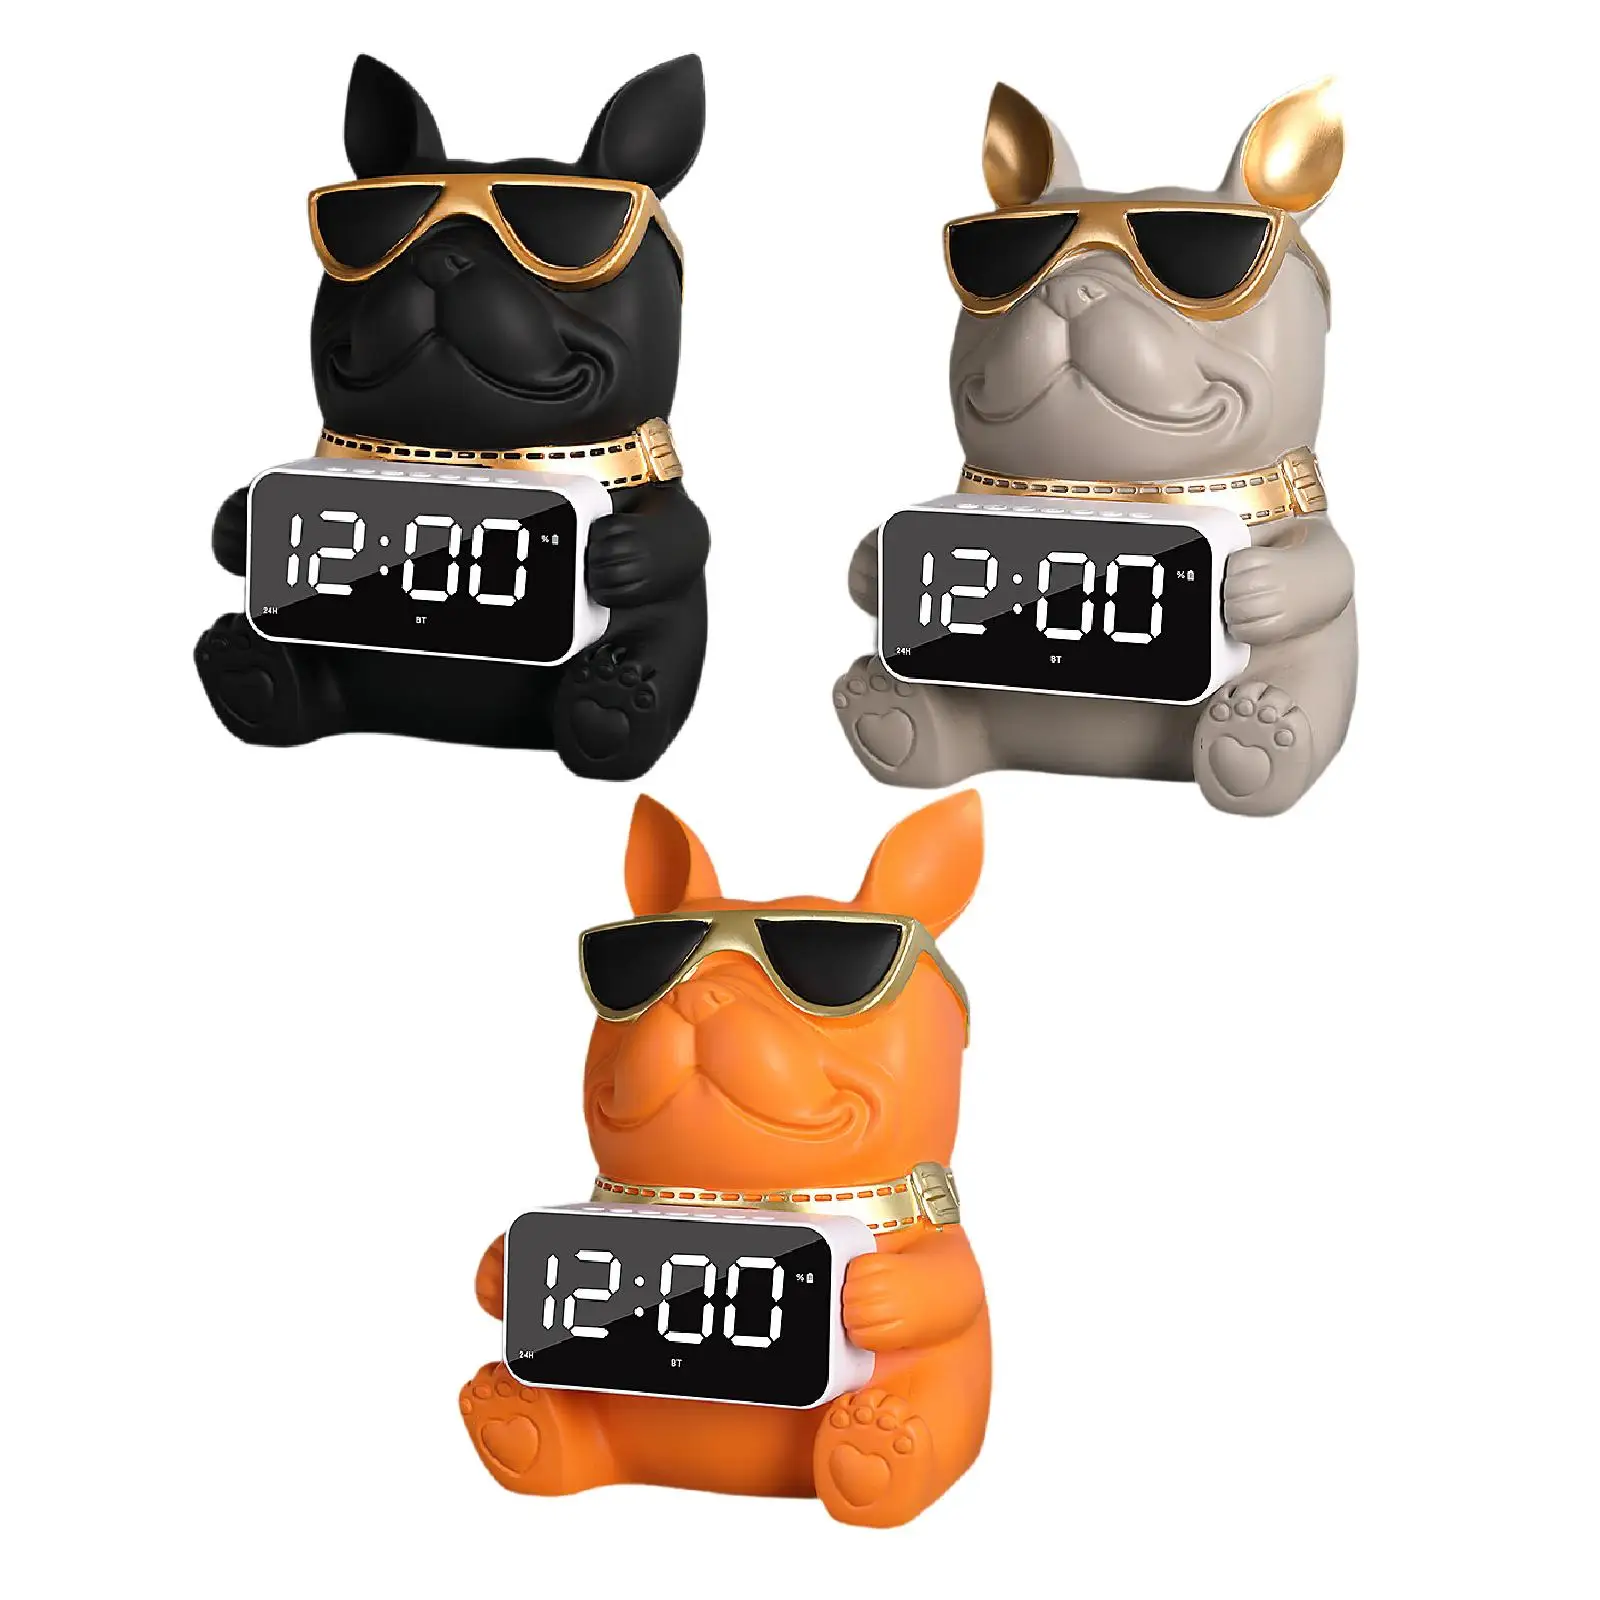 

Digital Alarm Clock Home Puppy Tissue Box Cover Desk Speaker for Toilet Paper Office NightStand Dining Table Vanity Countertop